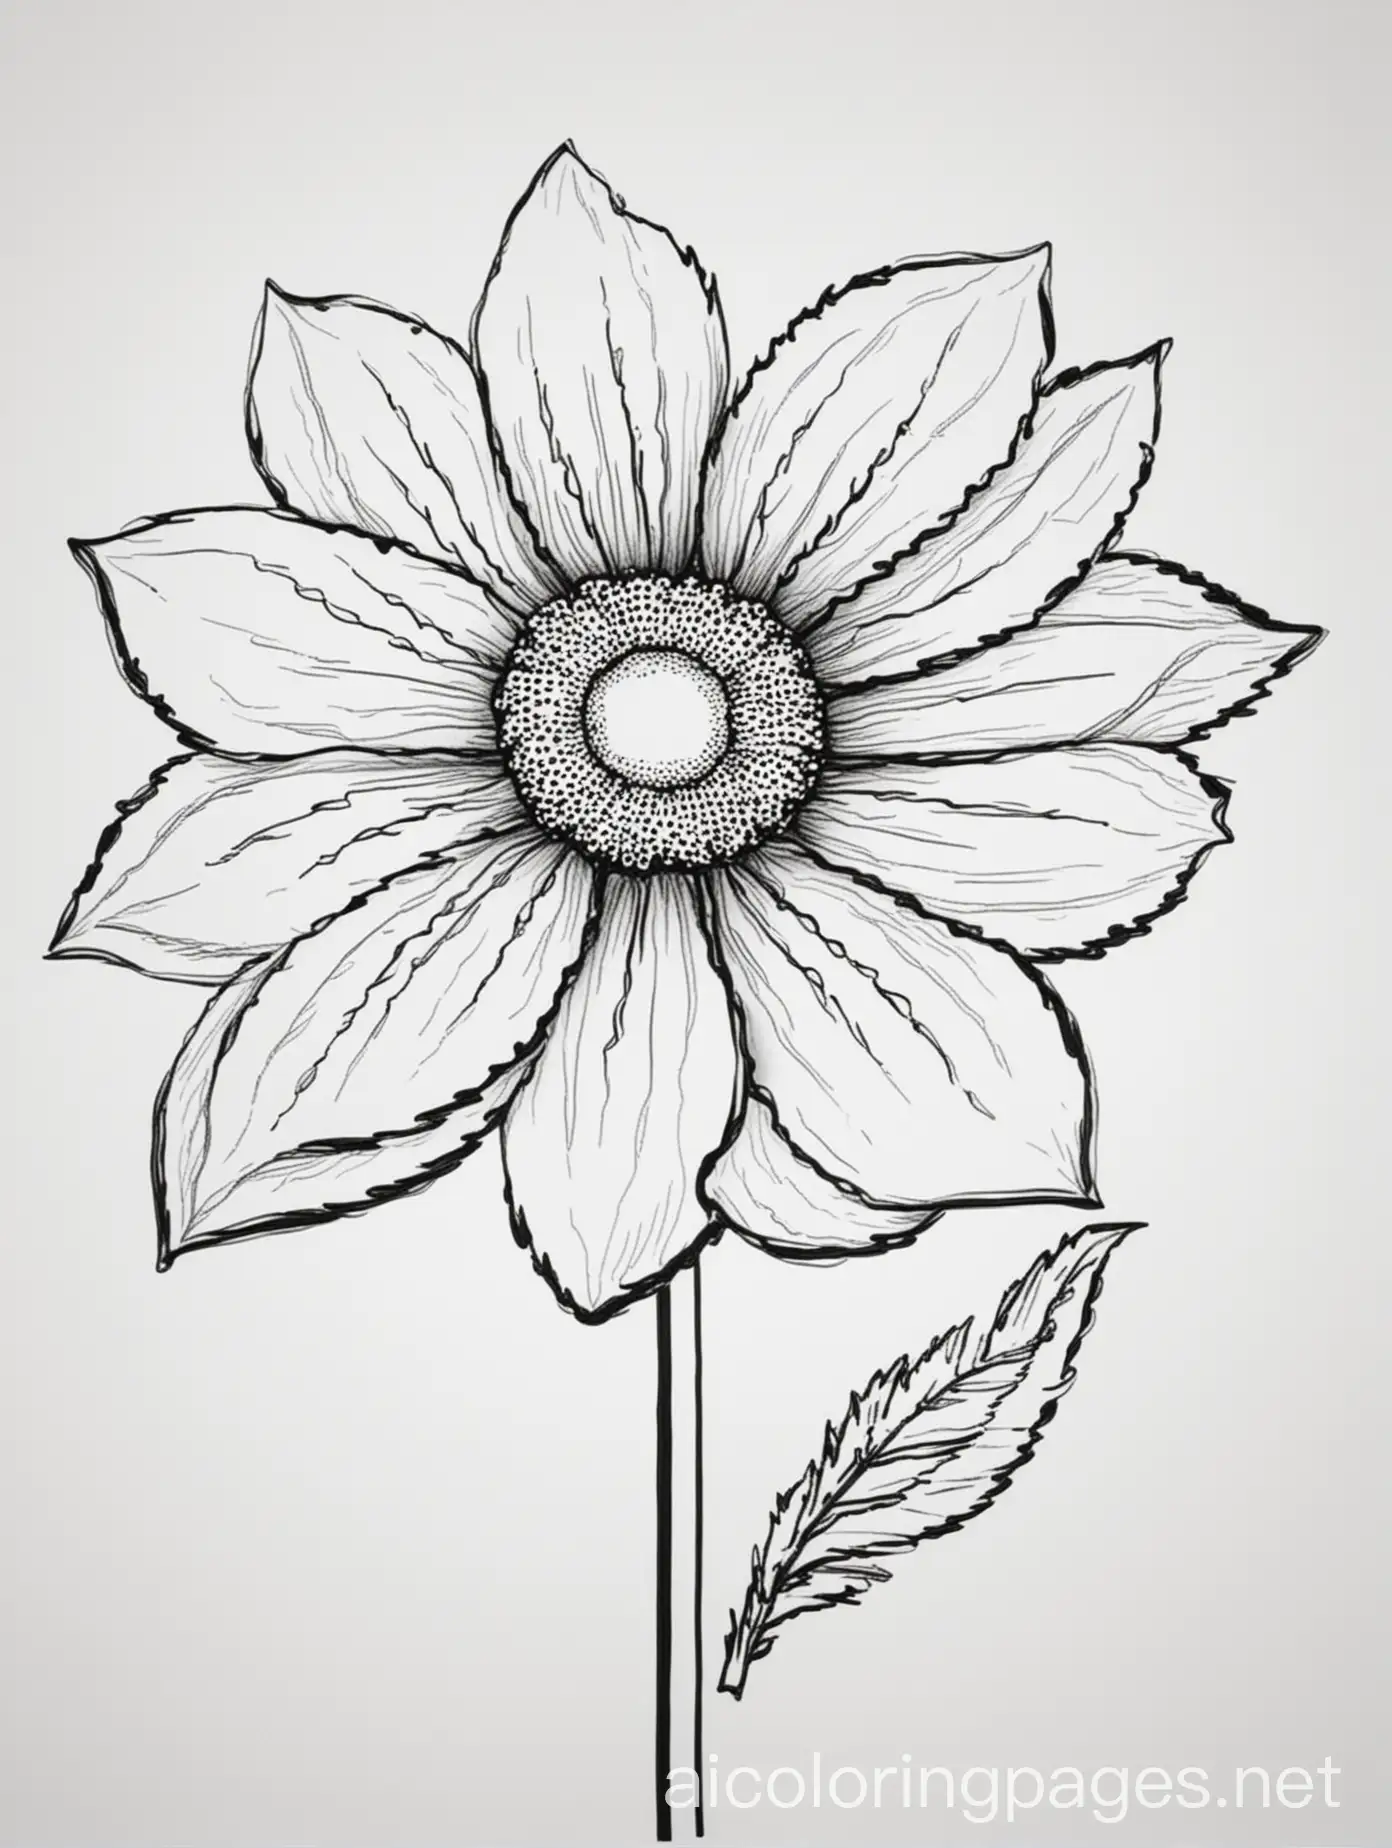 a flower picture, Coloring Page, black and white, line art, white background, Simplicity, Ample White Space. The background of the coloring page is plain white to make it easy for young children to color within the lines. The outlines of all the subjects are easy to distinguish, making it simple for kids to color without too much difficulty